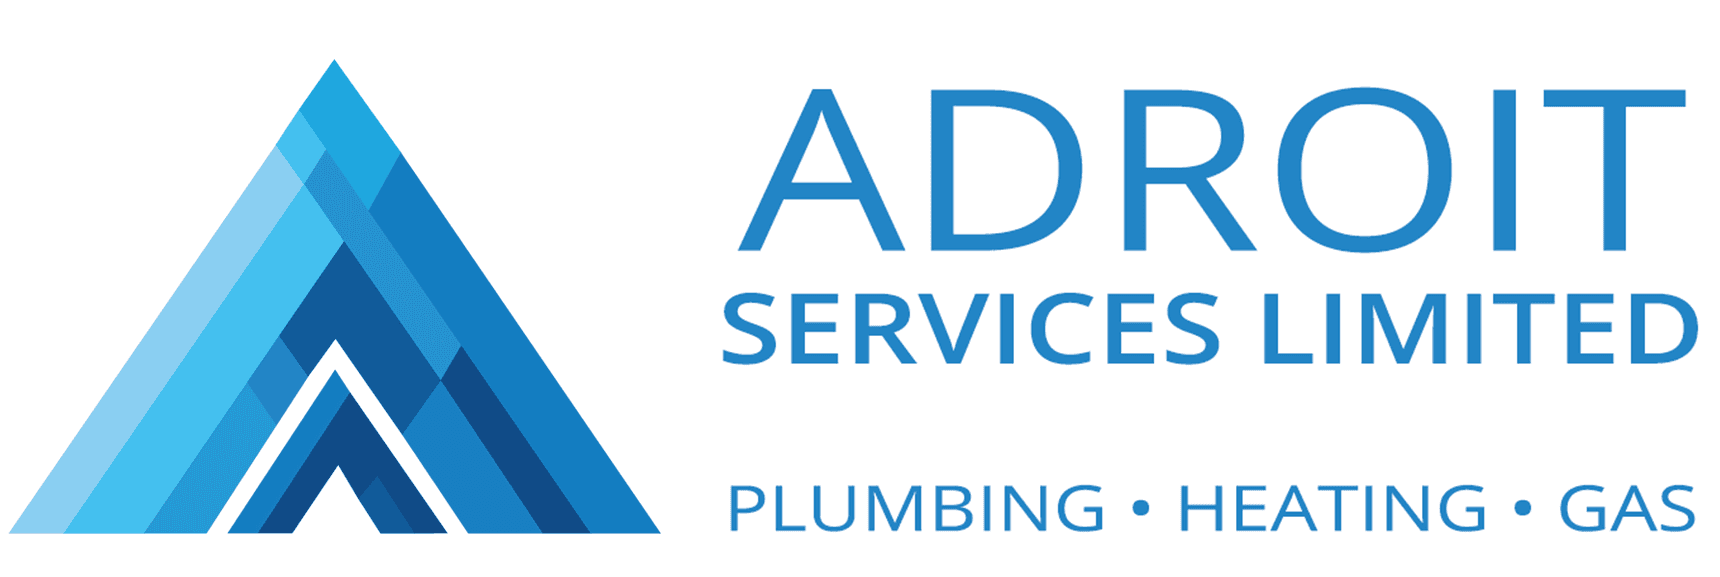 Adroit Services Limited logo